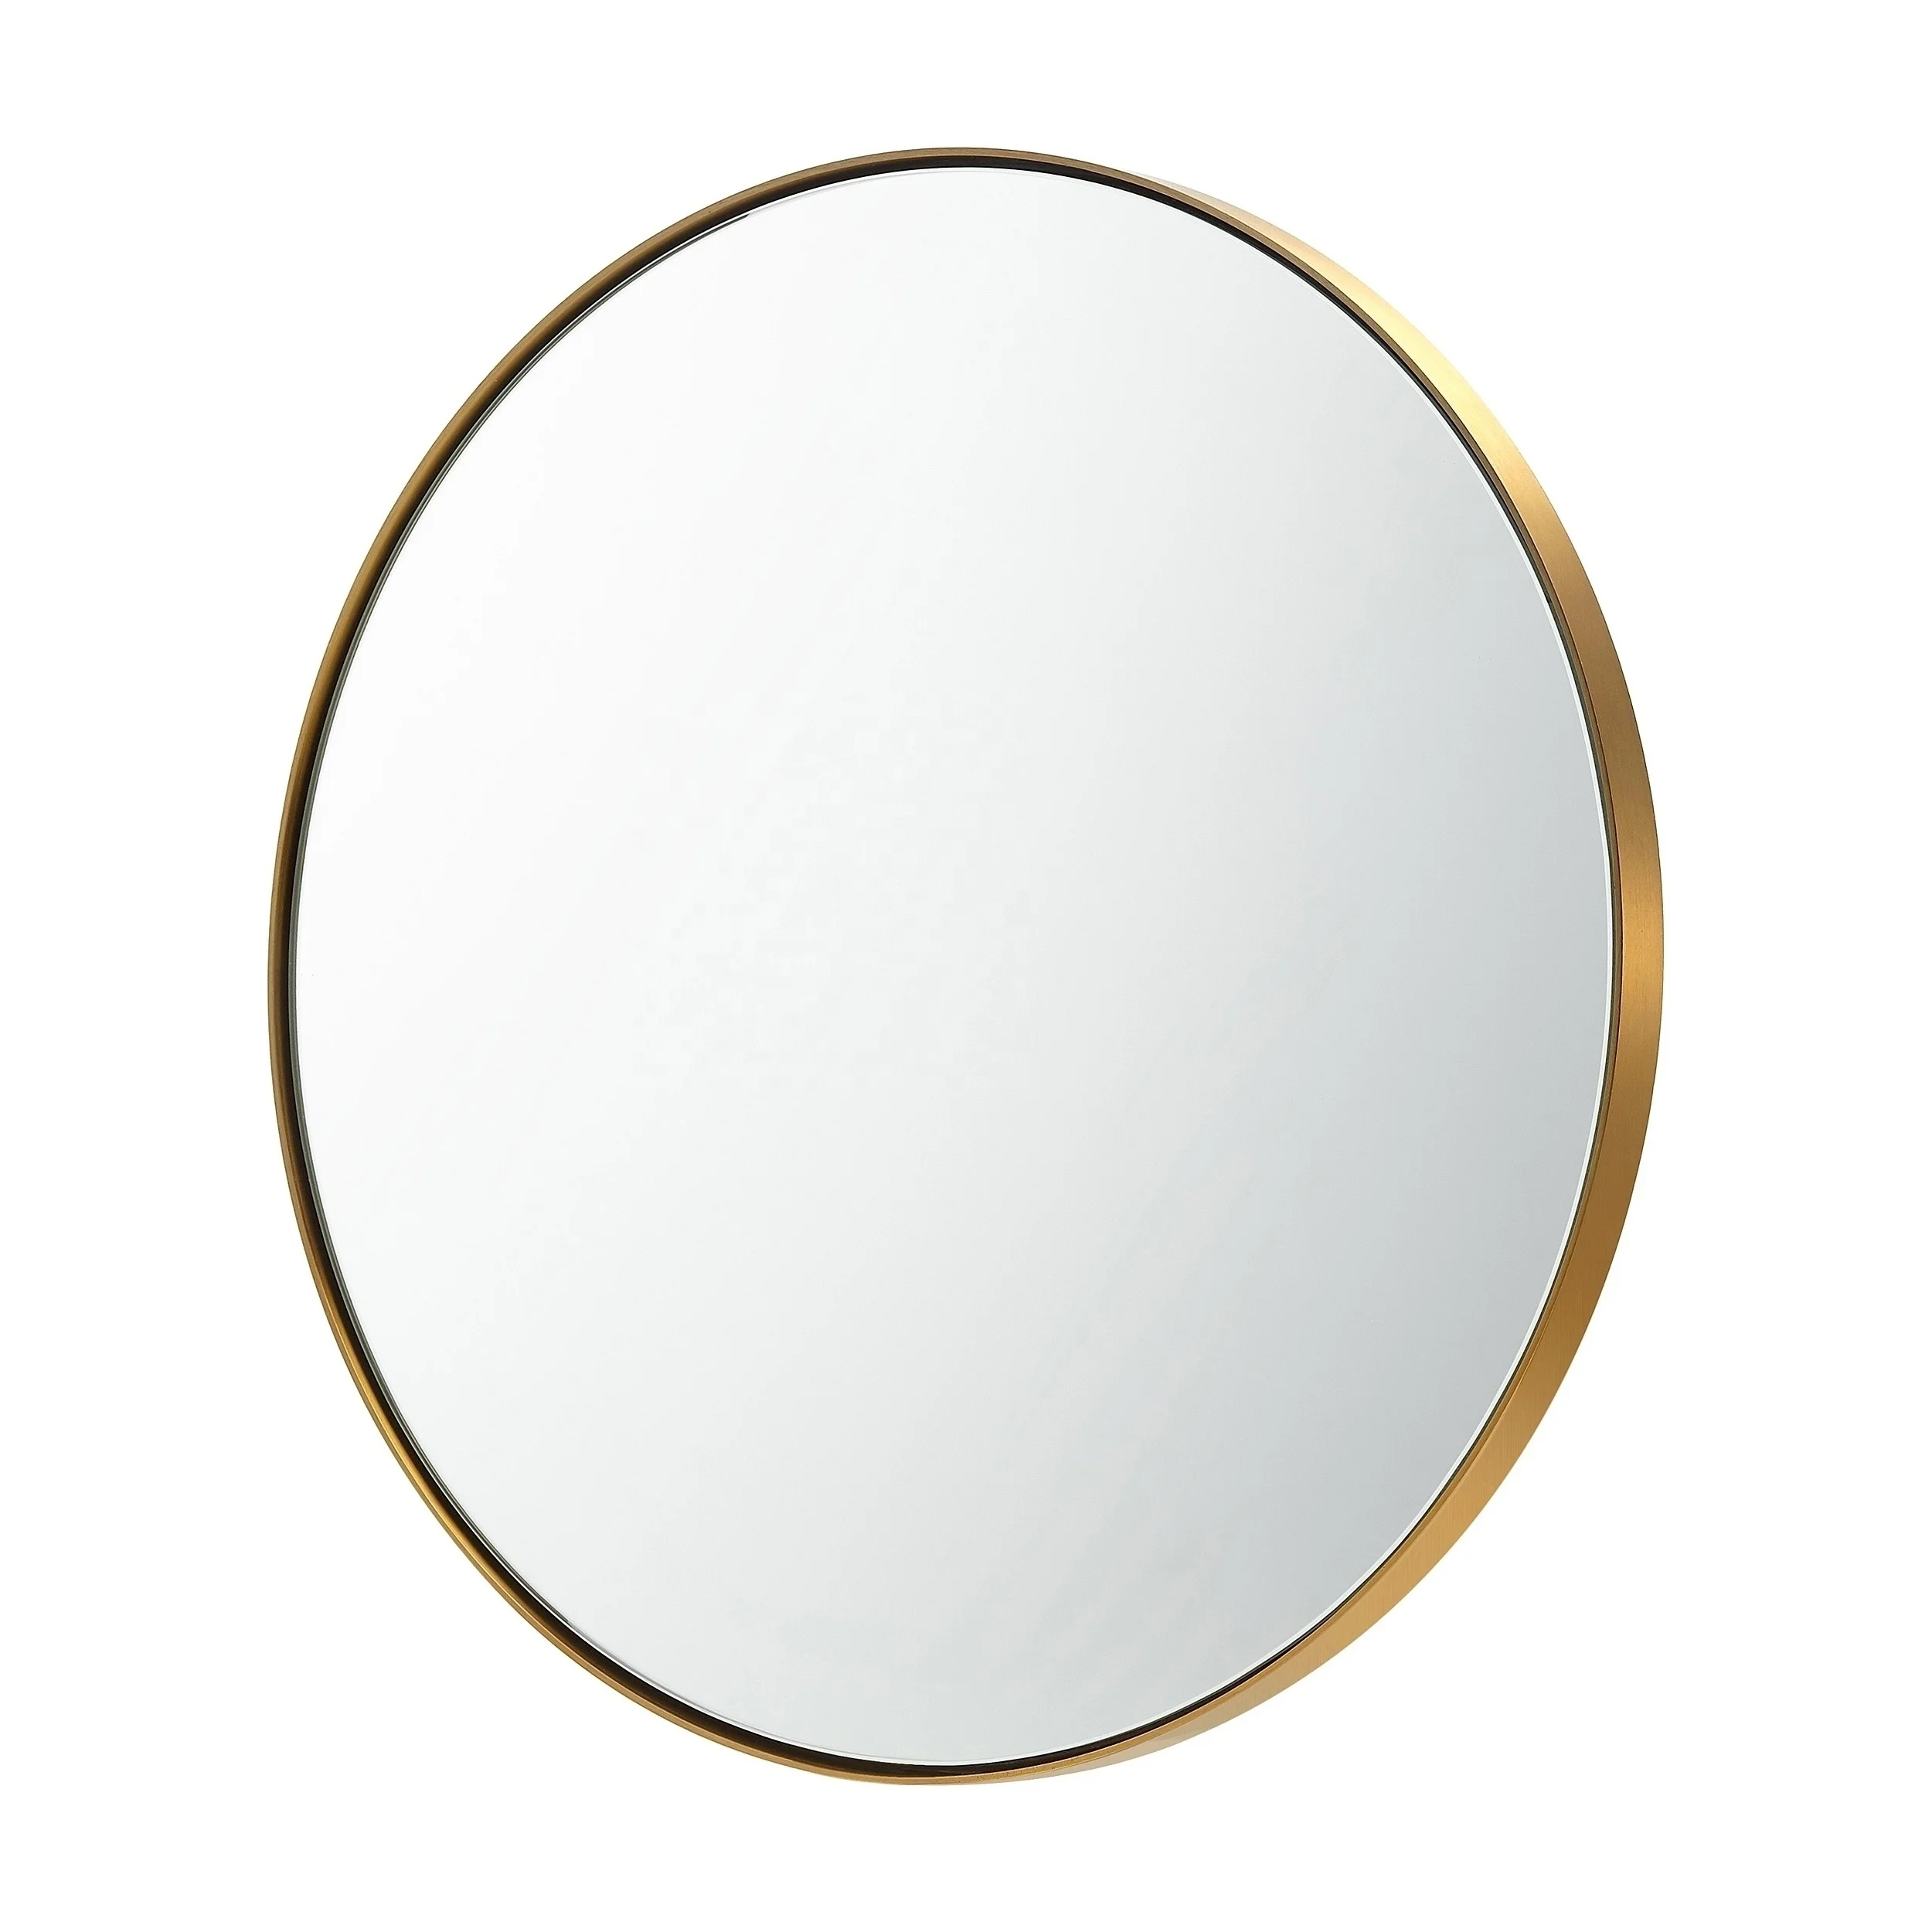 

MOK Stainless steel frame gold color metal decorative frame mirror top sale round framed wall mirror supplier from China